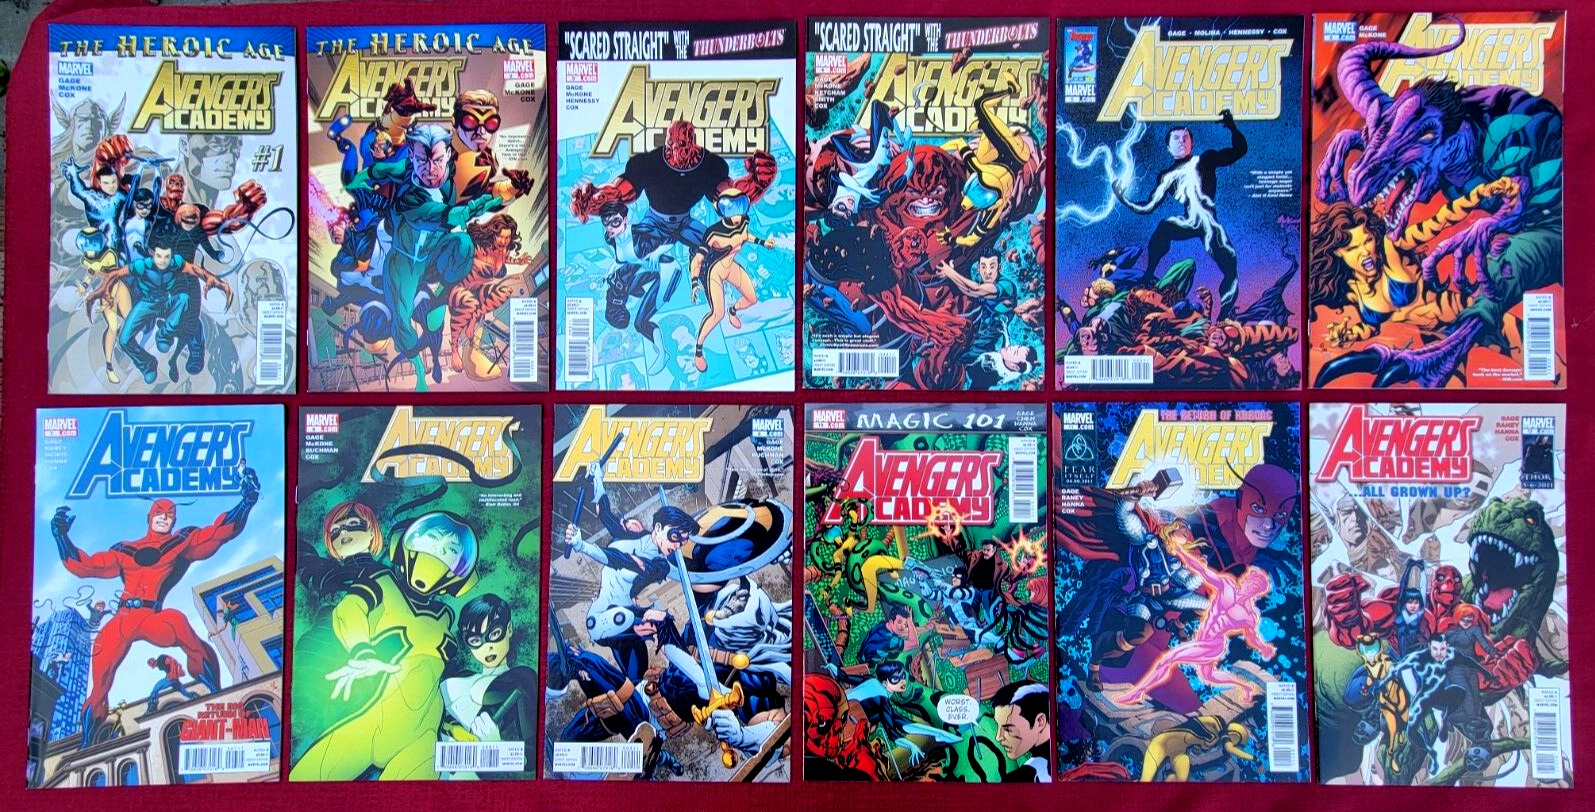 Avengers Academy (2010) #1-39 Complete Set + 14.1 & Giant Size #1